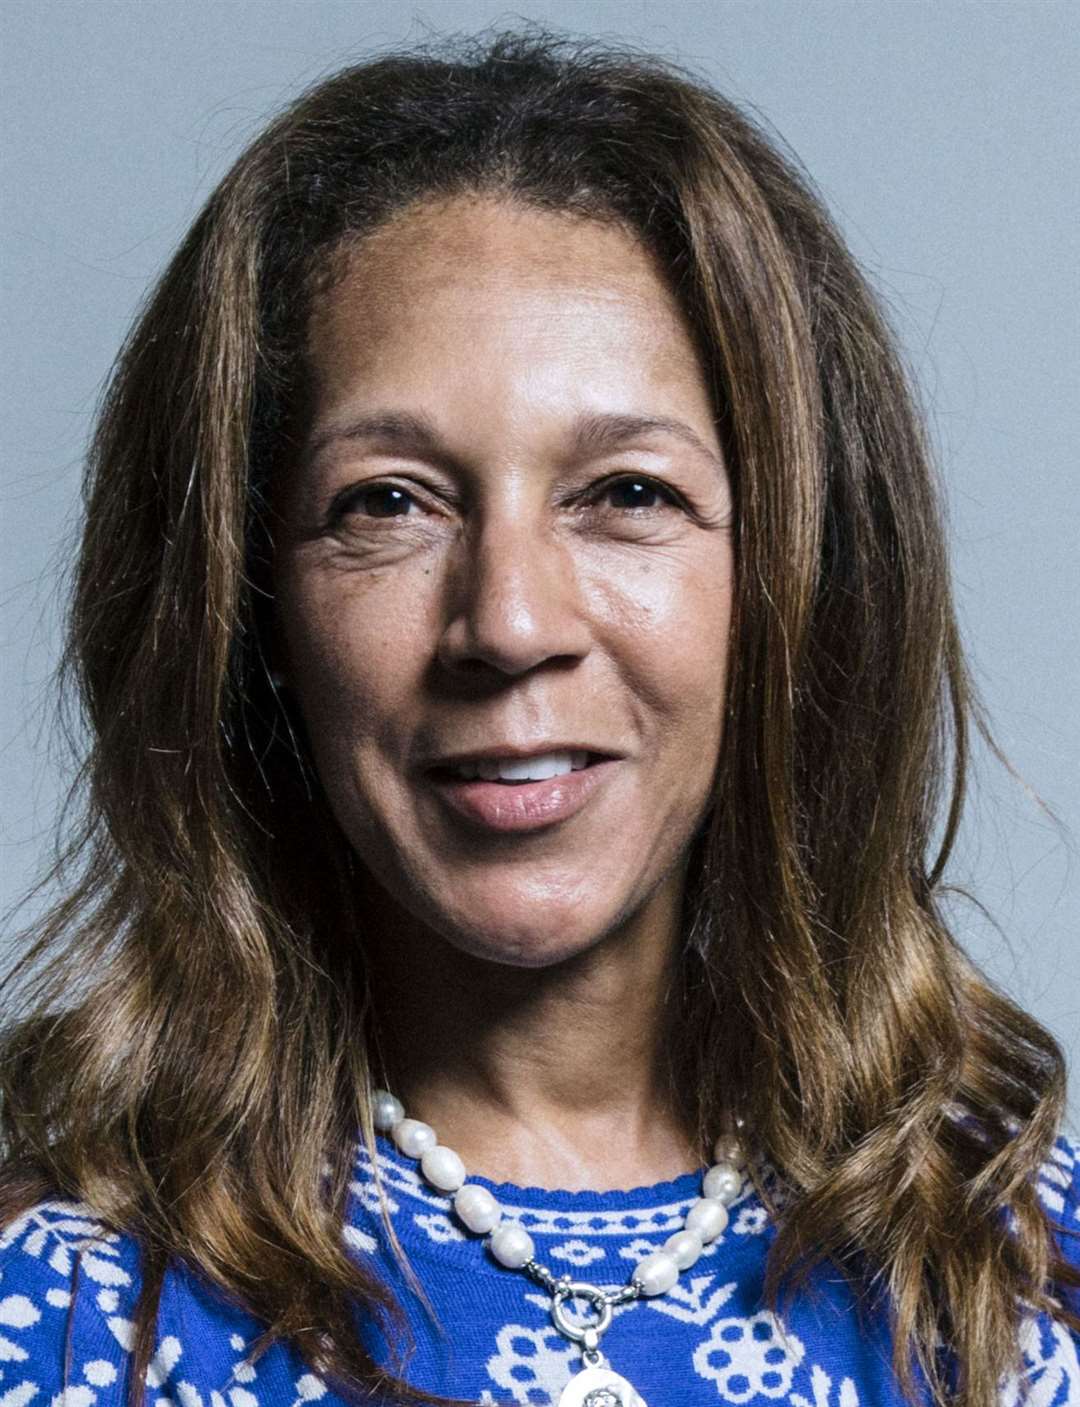 Maidstone and the Weald MP Helen Grant